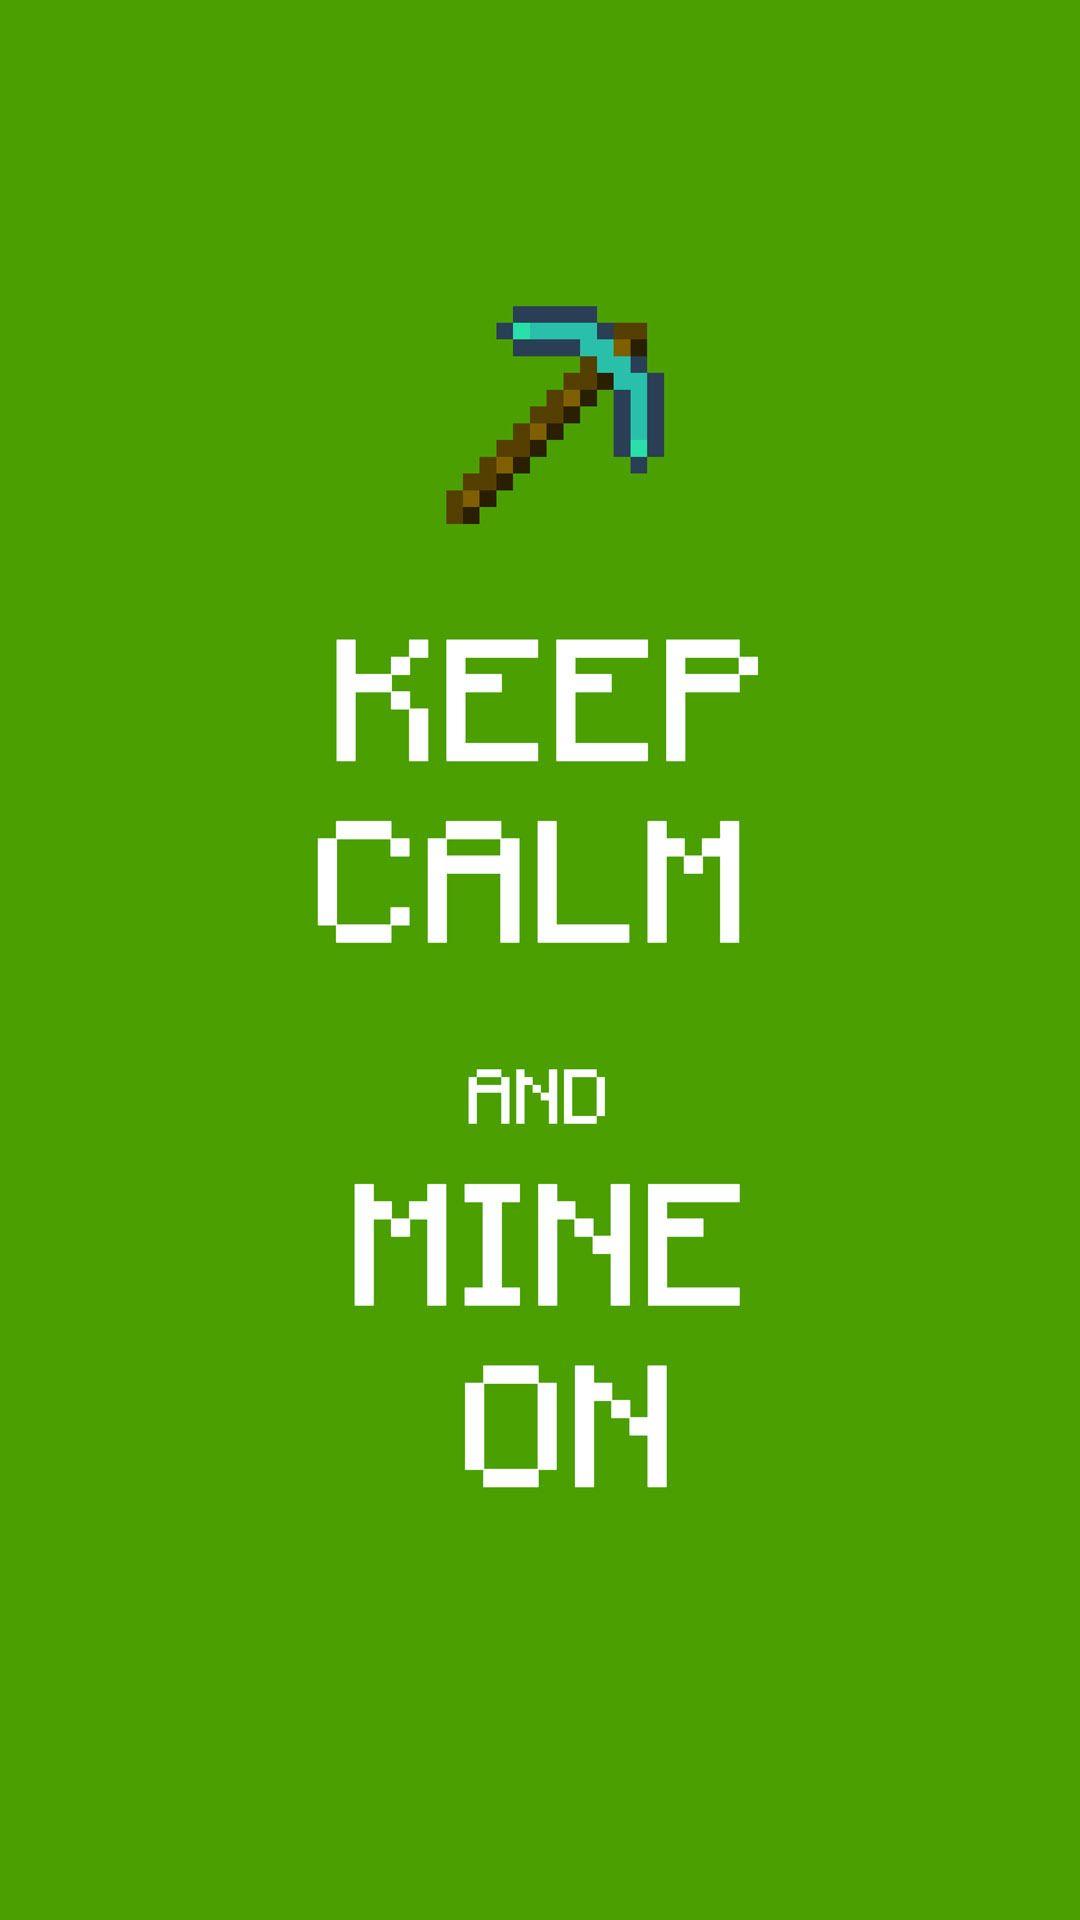 Awesome 9 Minecraft HD iPhone Wallpaper For Your Android or iPhone Wallpaper #android #iphone #wallpaper. Keep calm image, Keep calm quotes, Keep calm picture